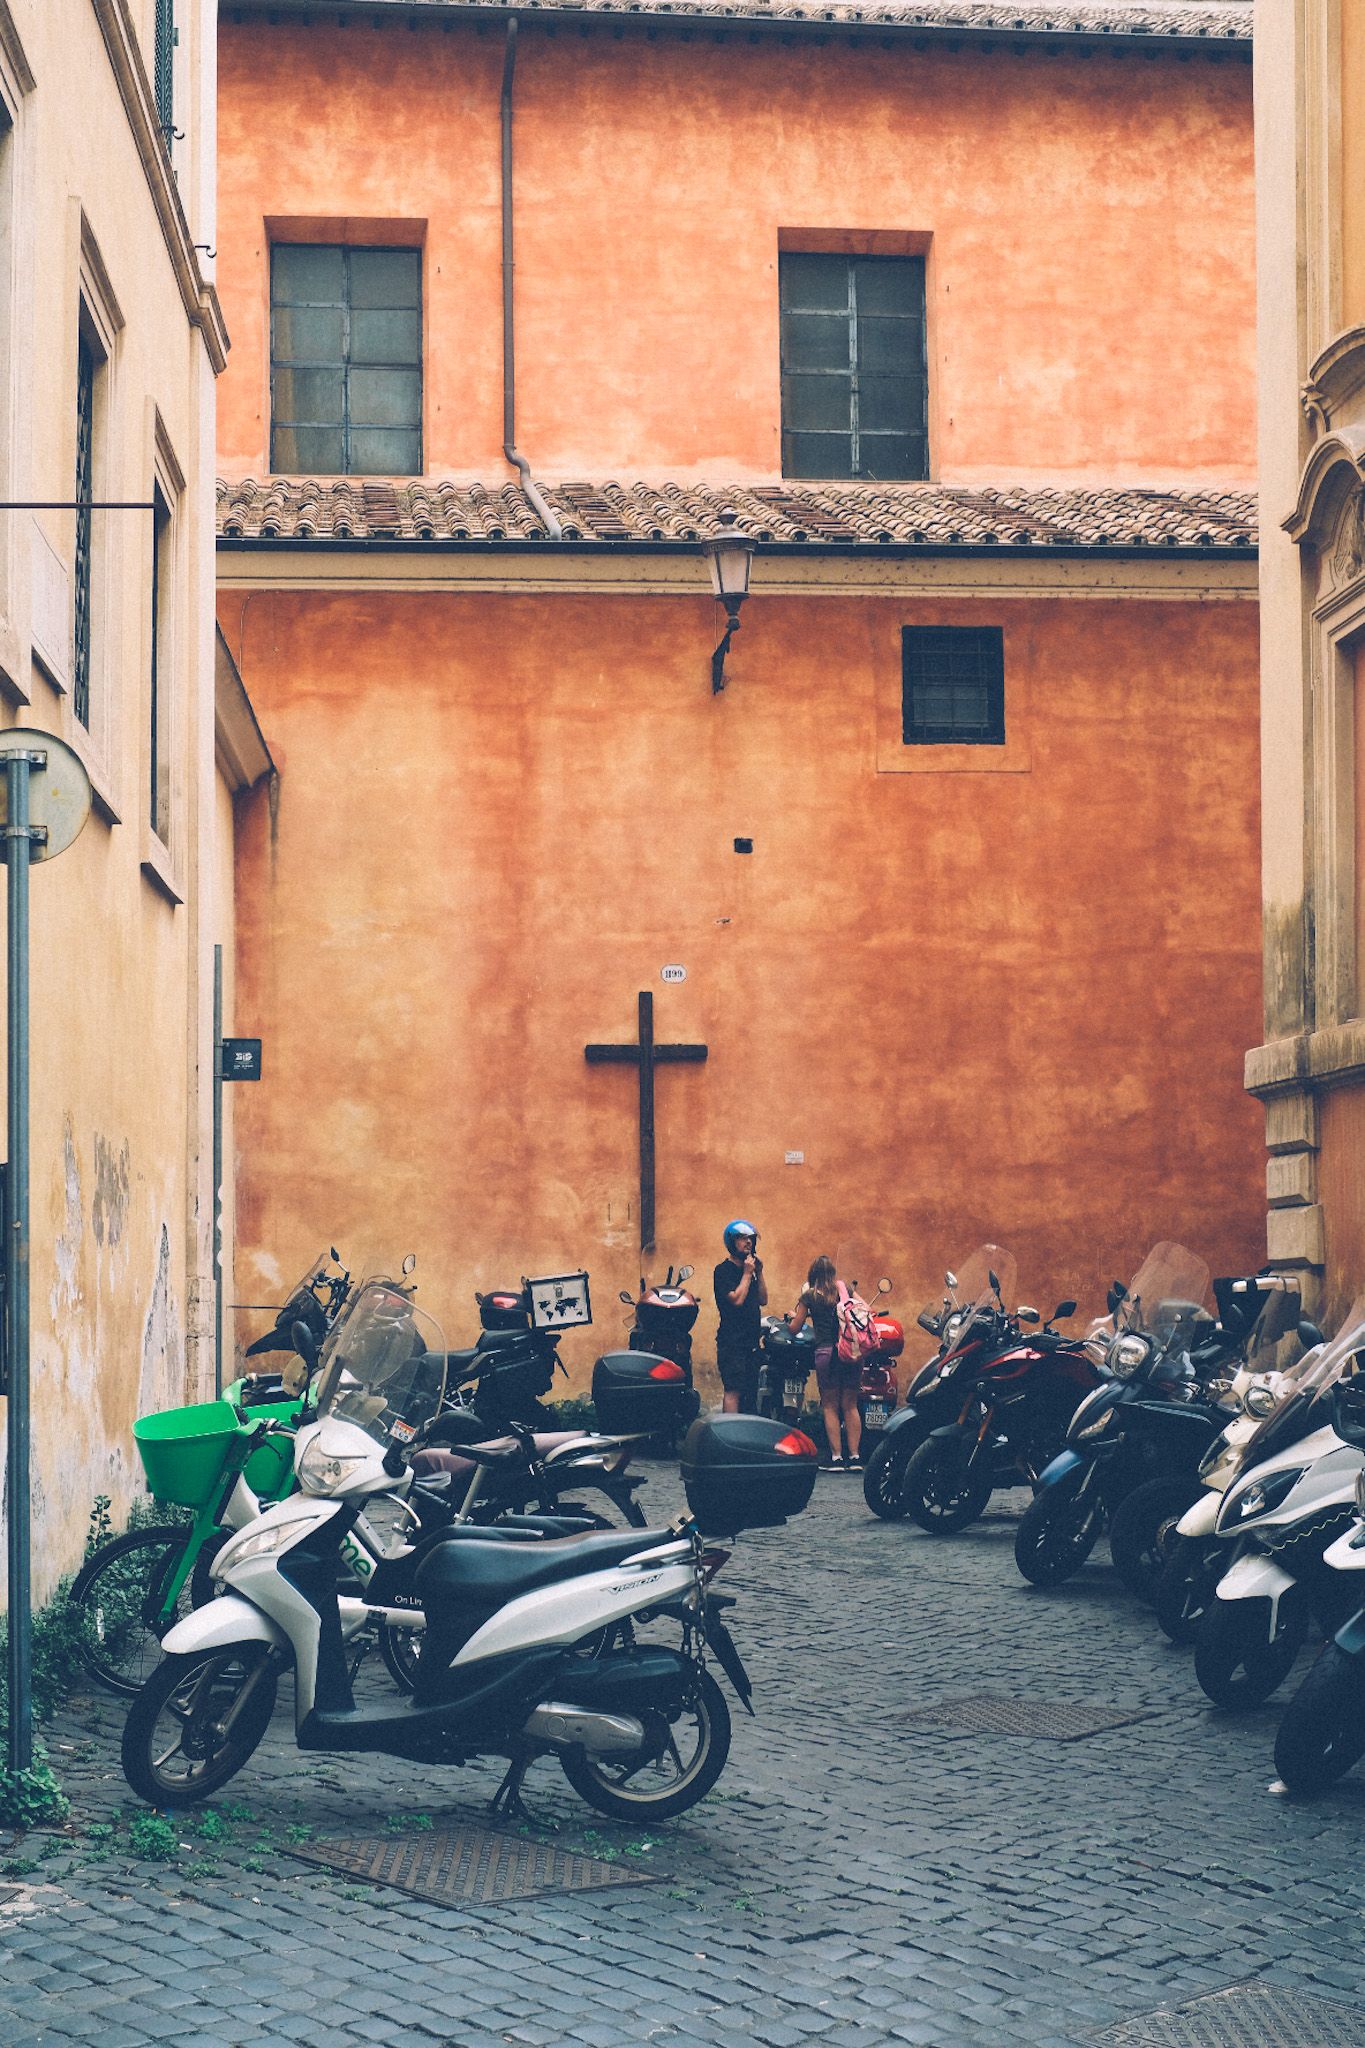 A wooden cross hangs outside on an orange wall of a building, a small square filled with motorcycles.